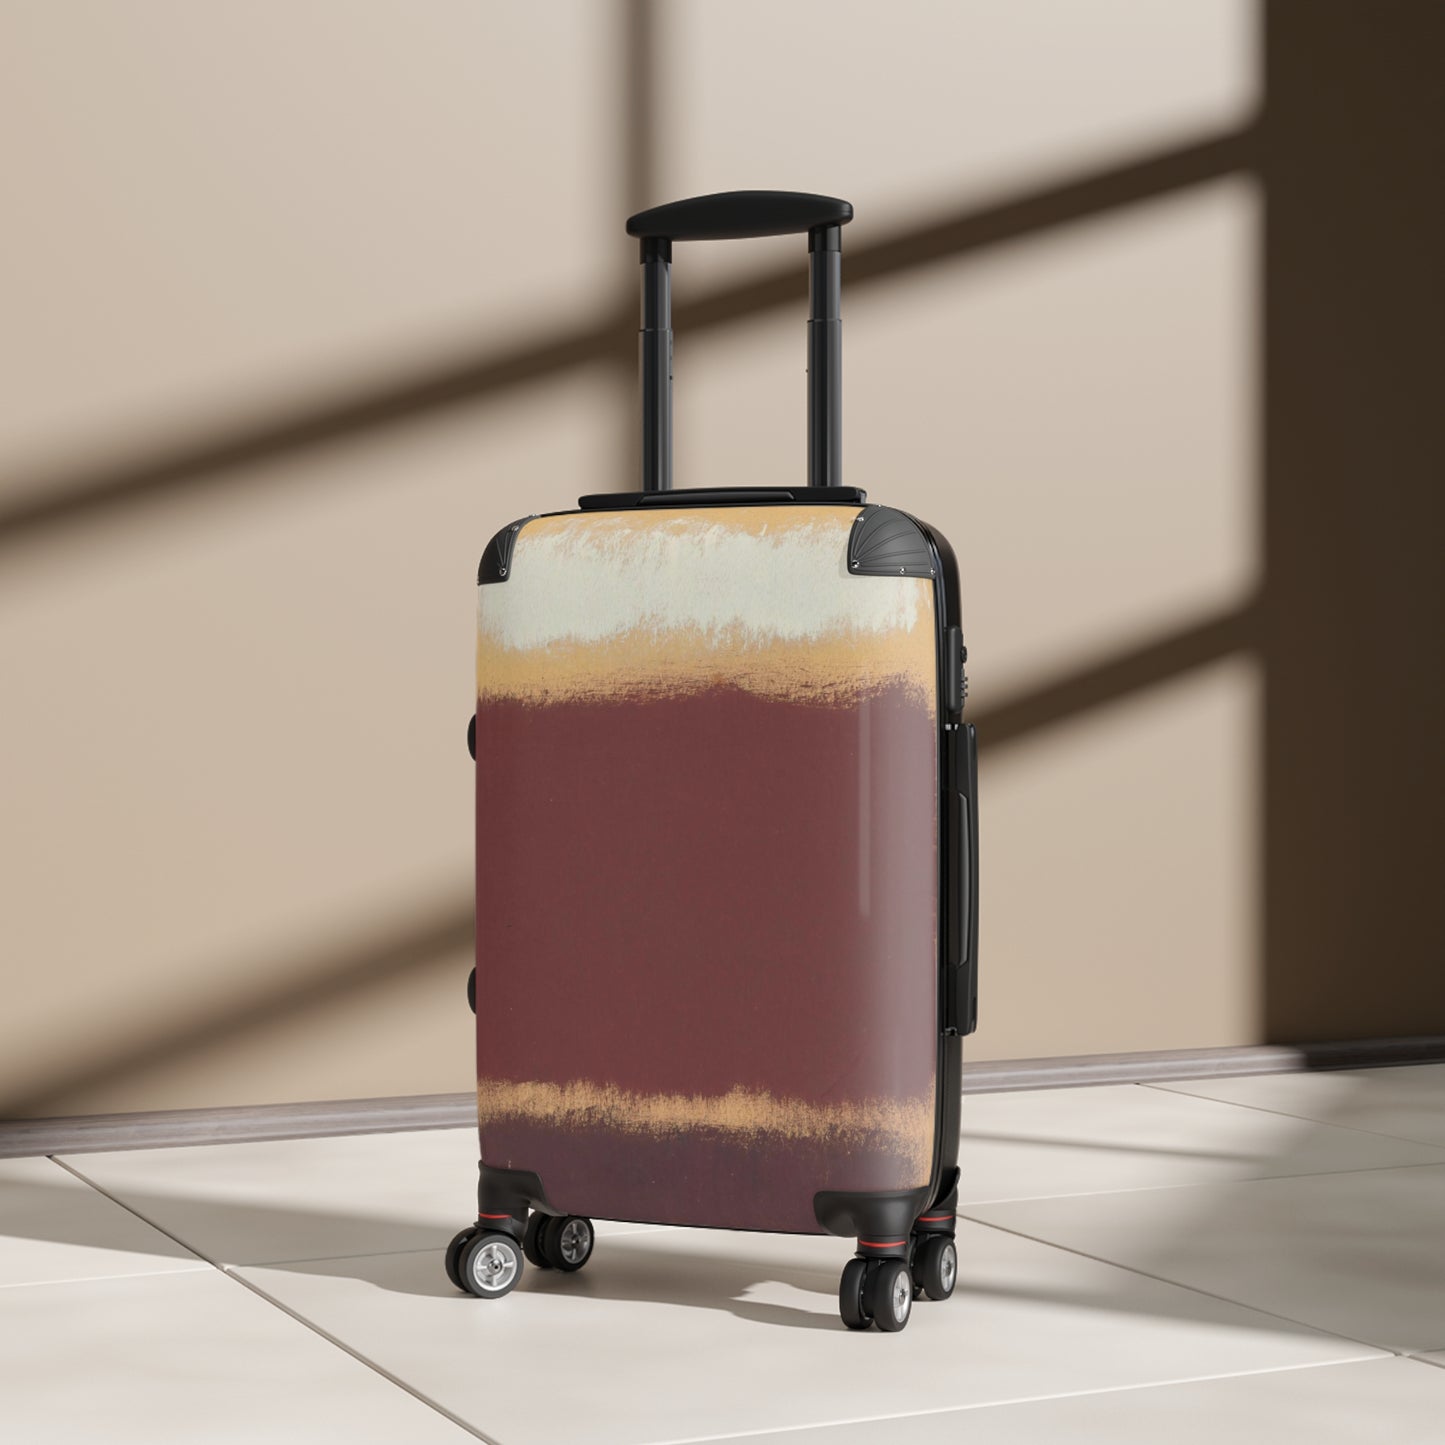 a piece of luggage sitting on top of a tiled floor